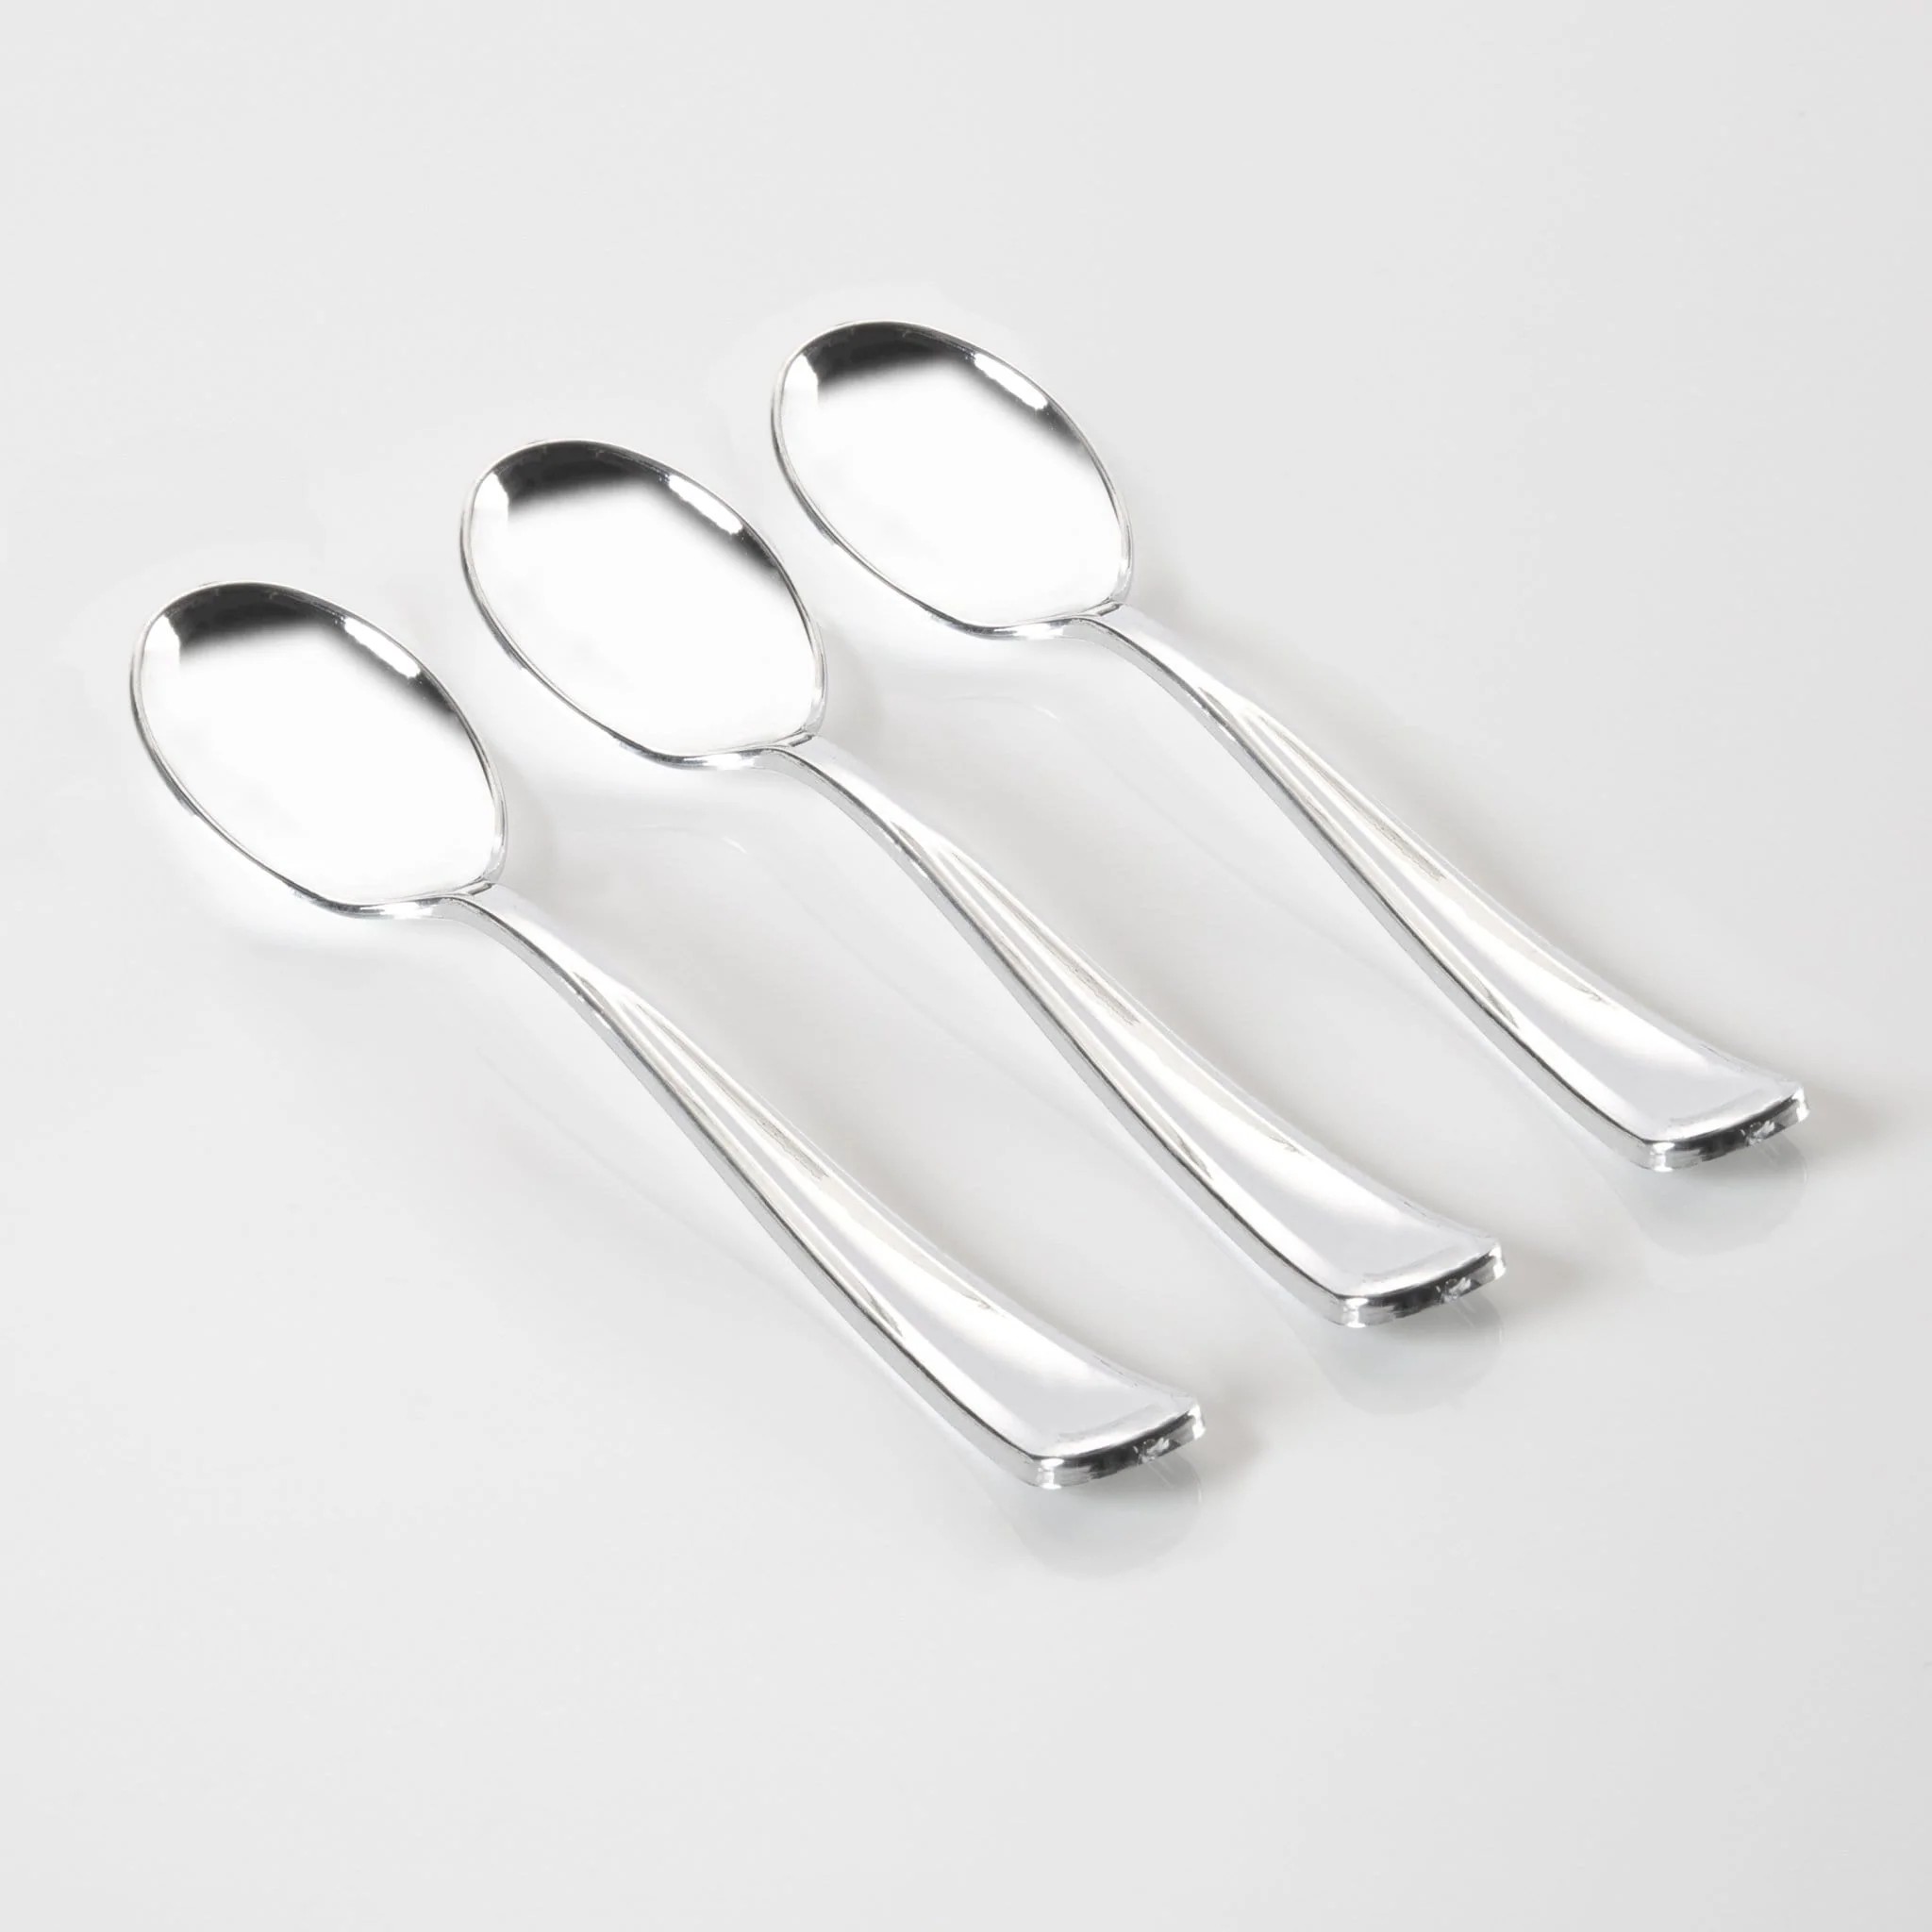 Luxe Party Classic Design Silver Plastic Spoons - 20 pcs